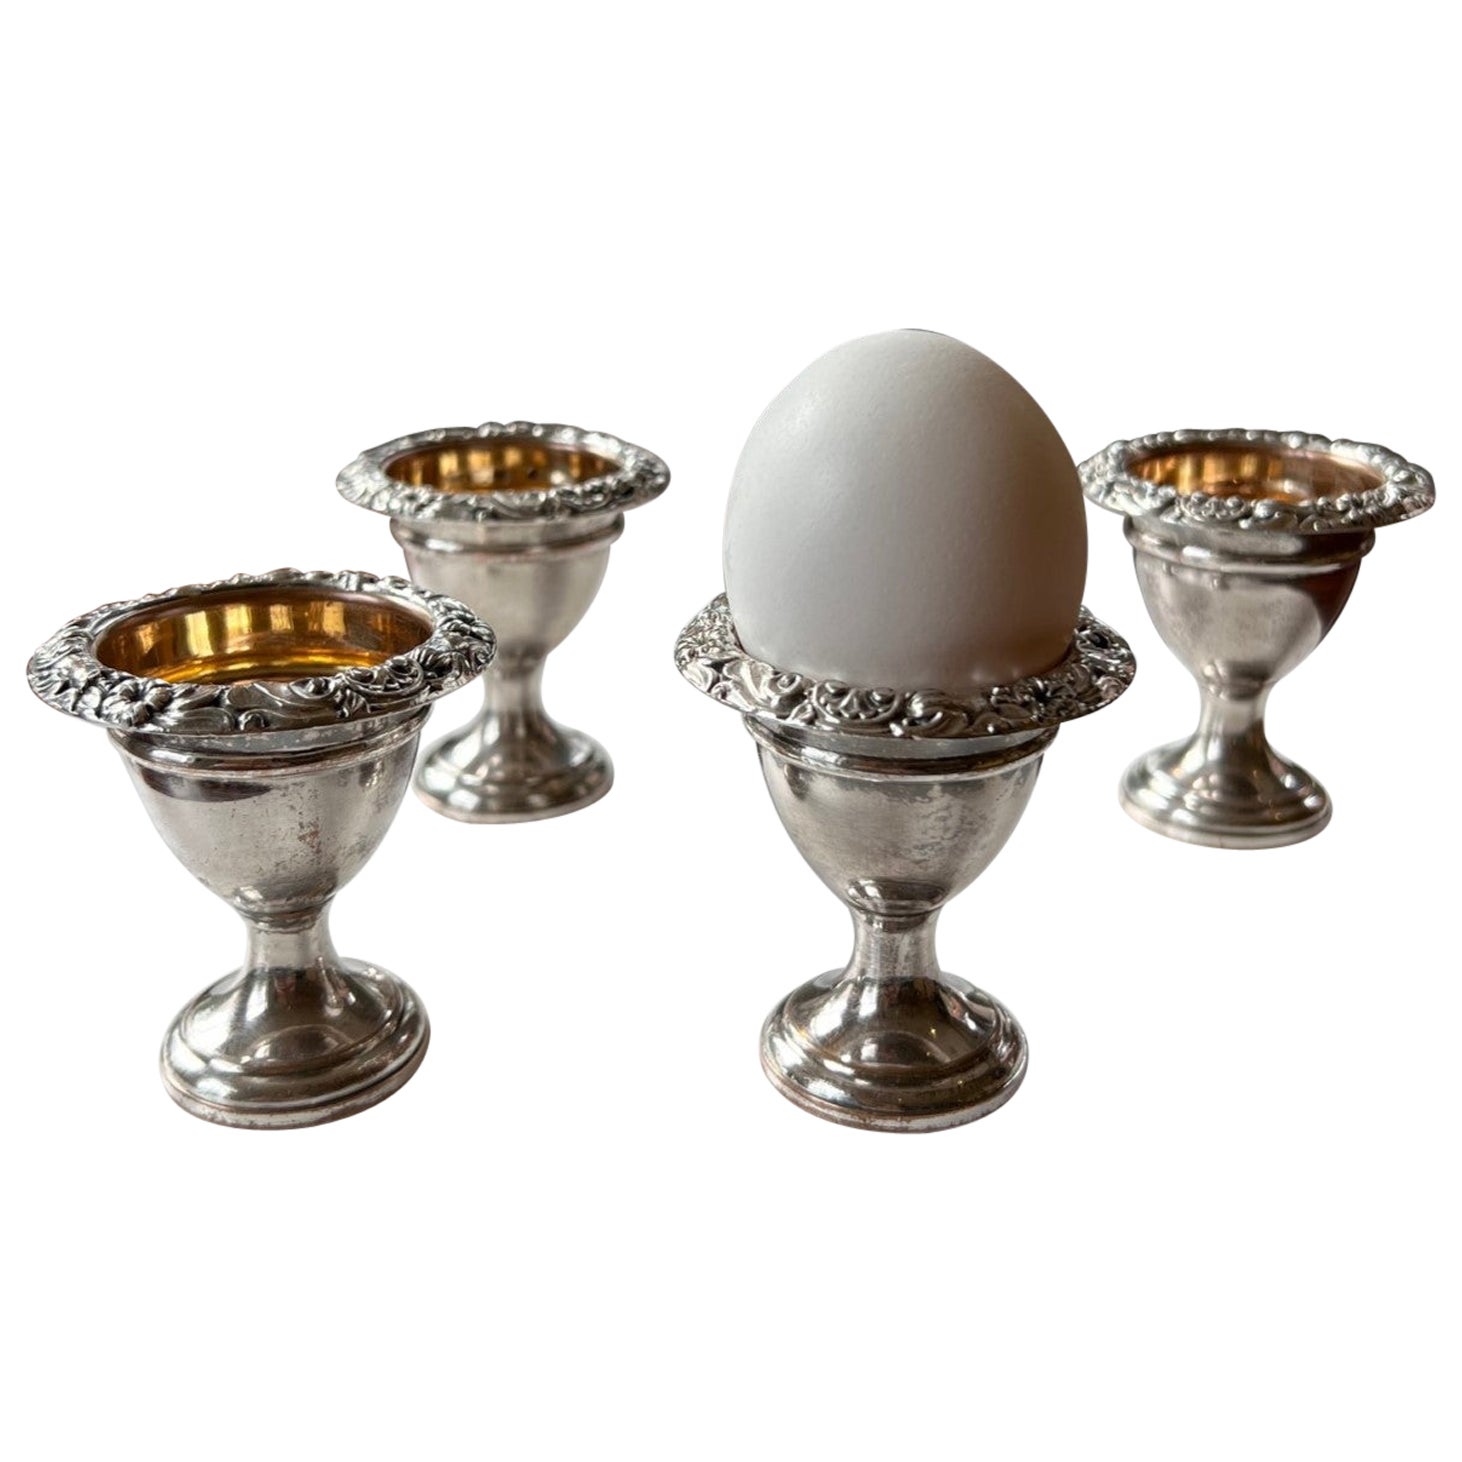 Antique Silverplate and Gilt Egg Cups - Set of 4